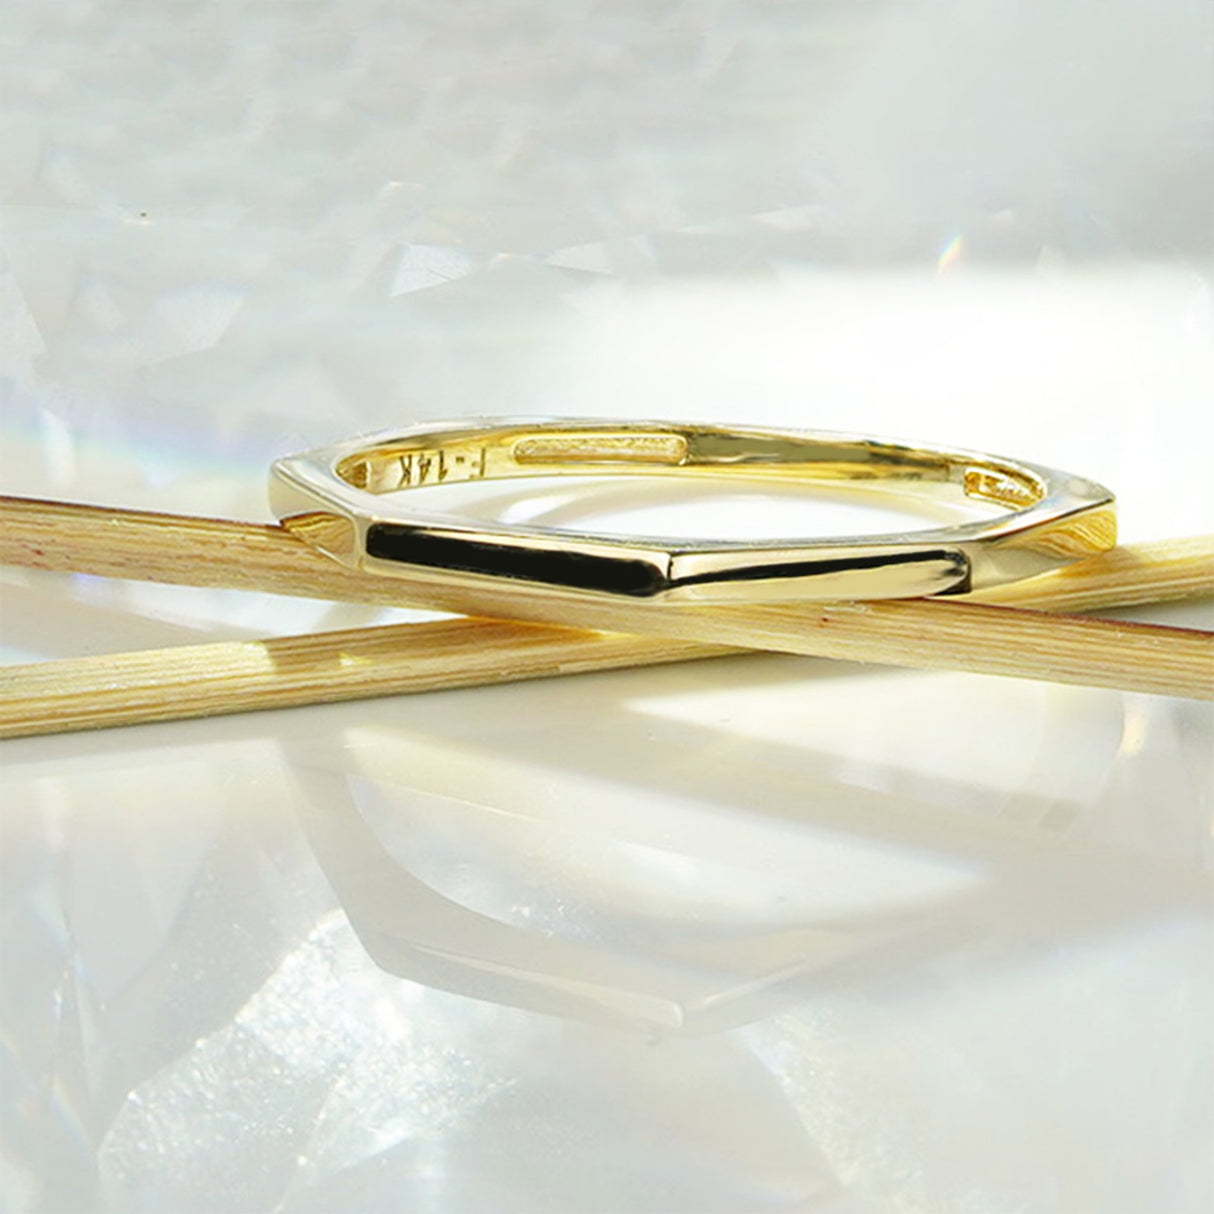 This elegant and stylish 14K gold geometric ring is perfect for any occasion. Its unique design and intricate details interlock perfectly to create an eye-catching stackable ring. Each detail is carefully crafted using 14k gold. Its stackable design makes it a great addition to any jewelry collection.